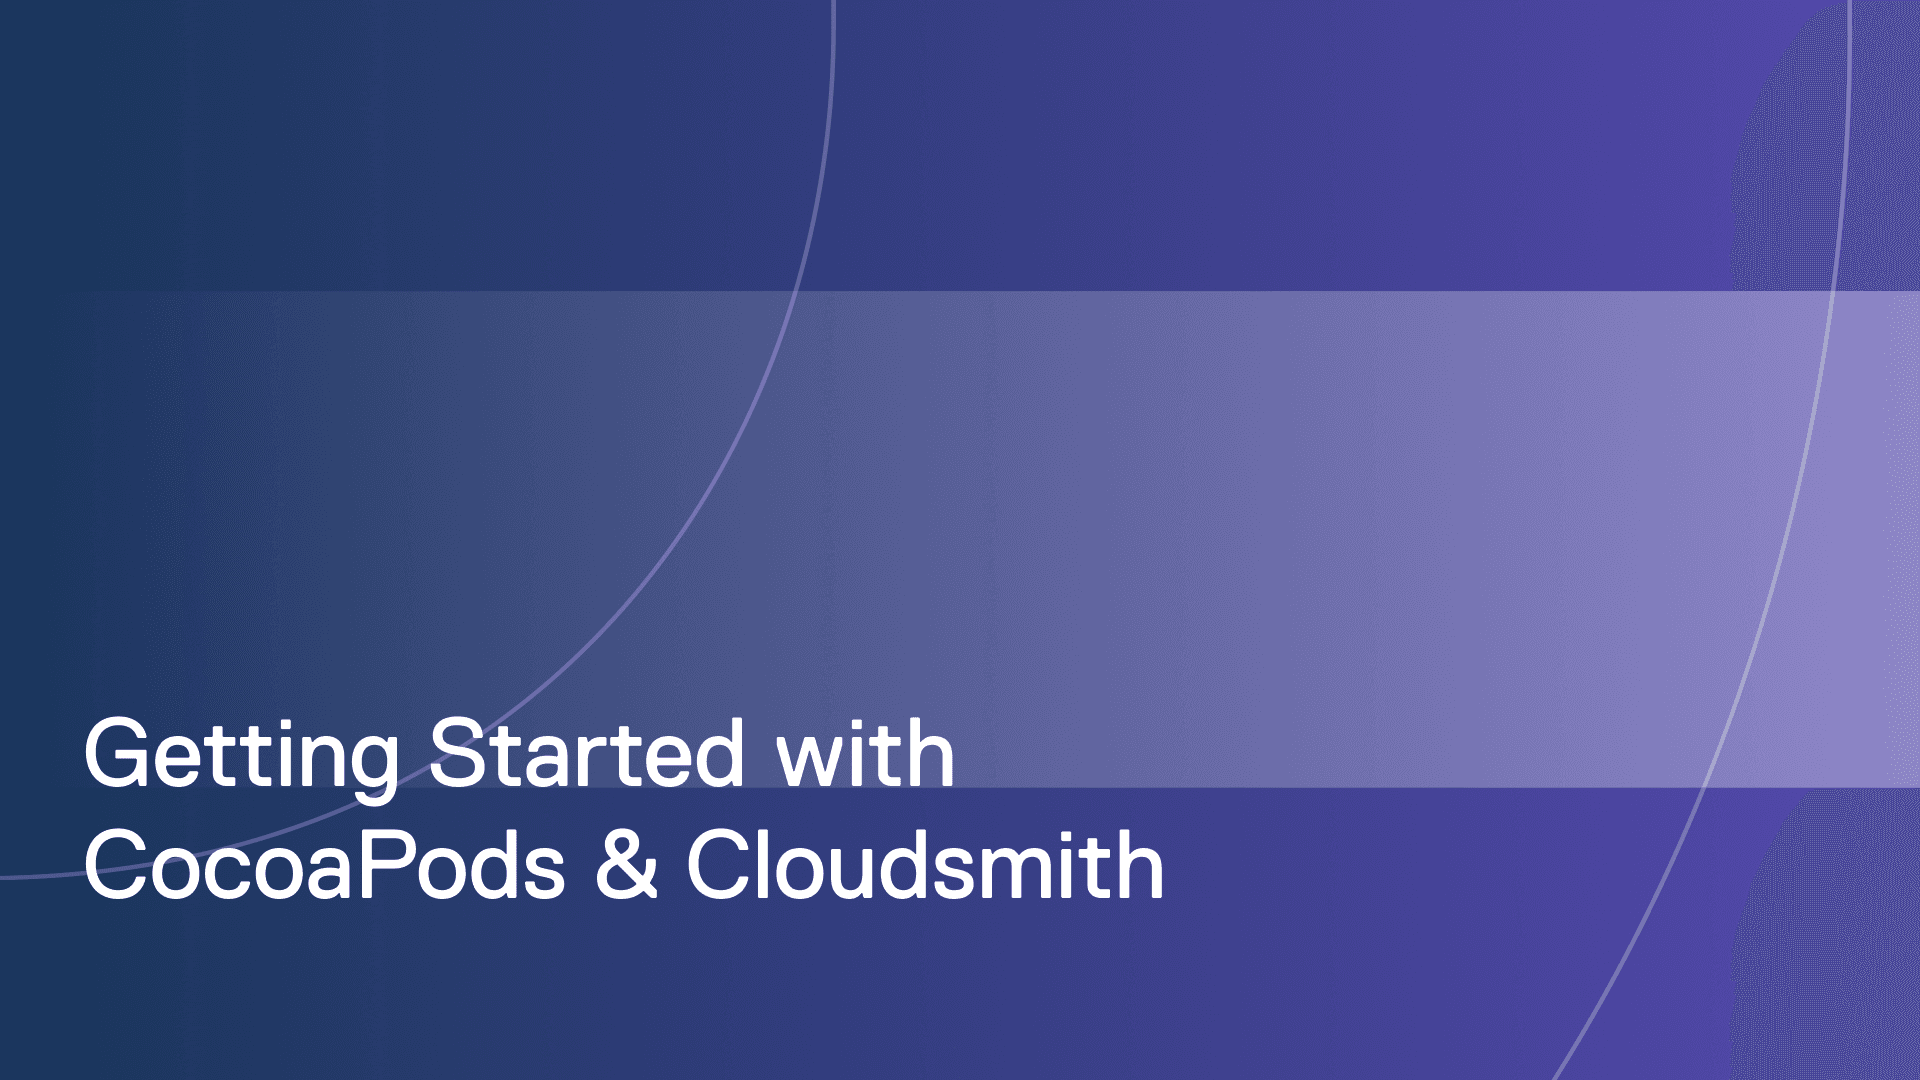 Getting started with CocoaPods and Cloudsmith